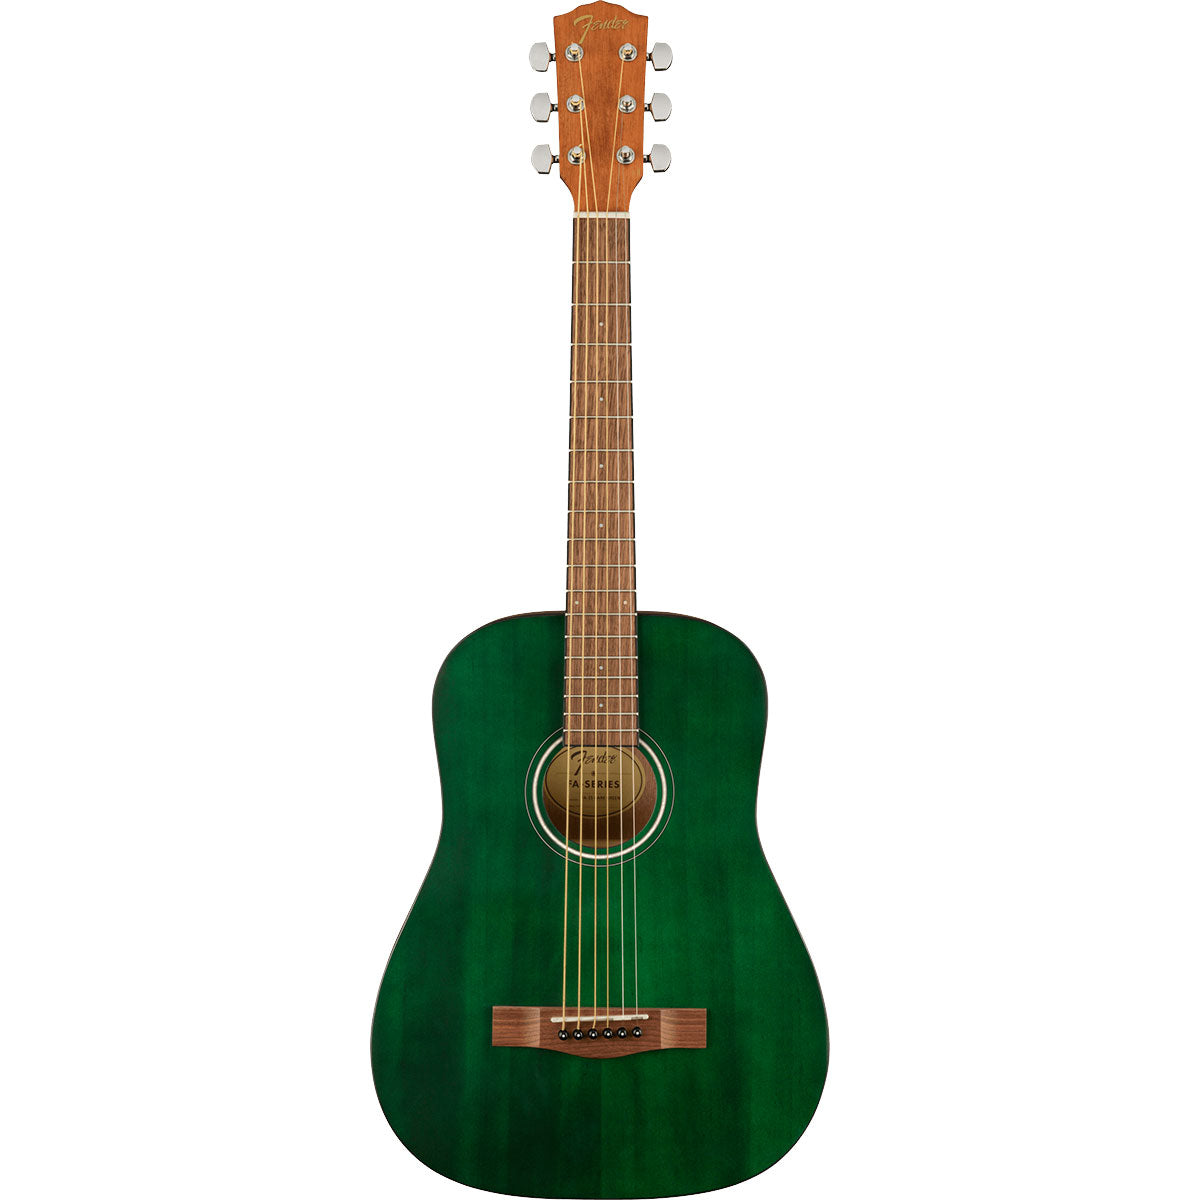 Top view of Fender FA-15 3/4 Steel Acoustic Guitar - Green